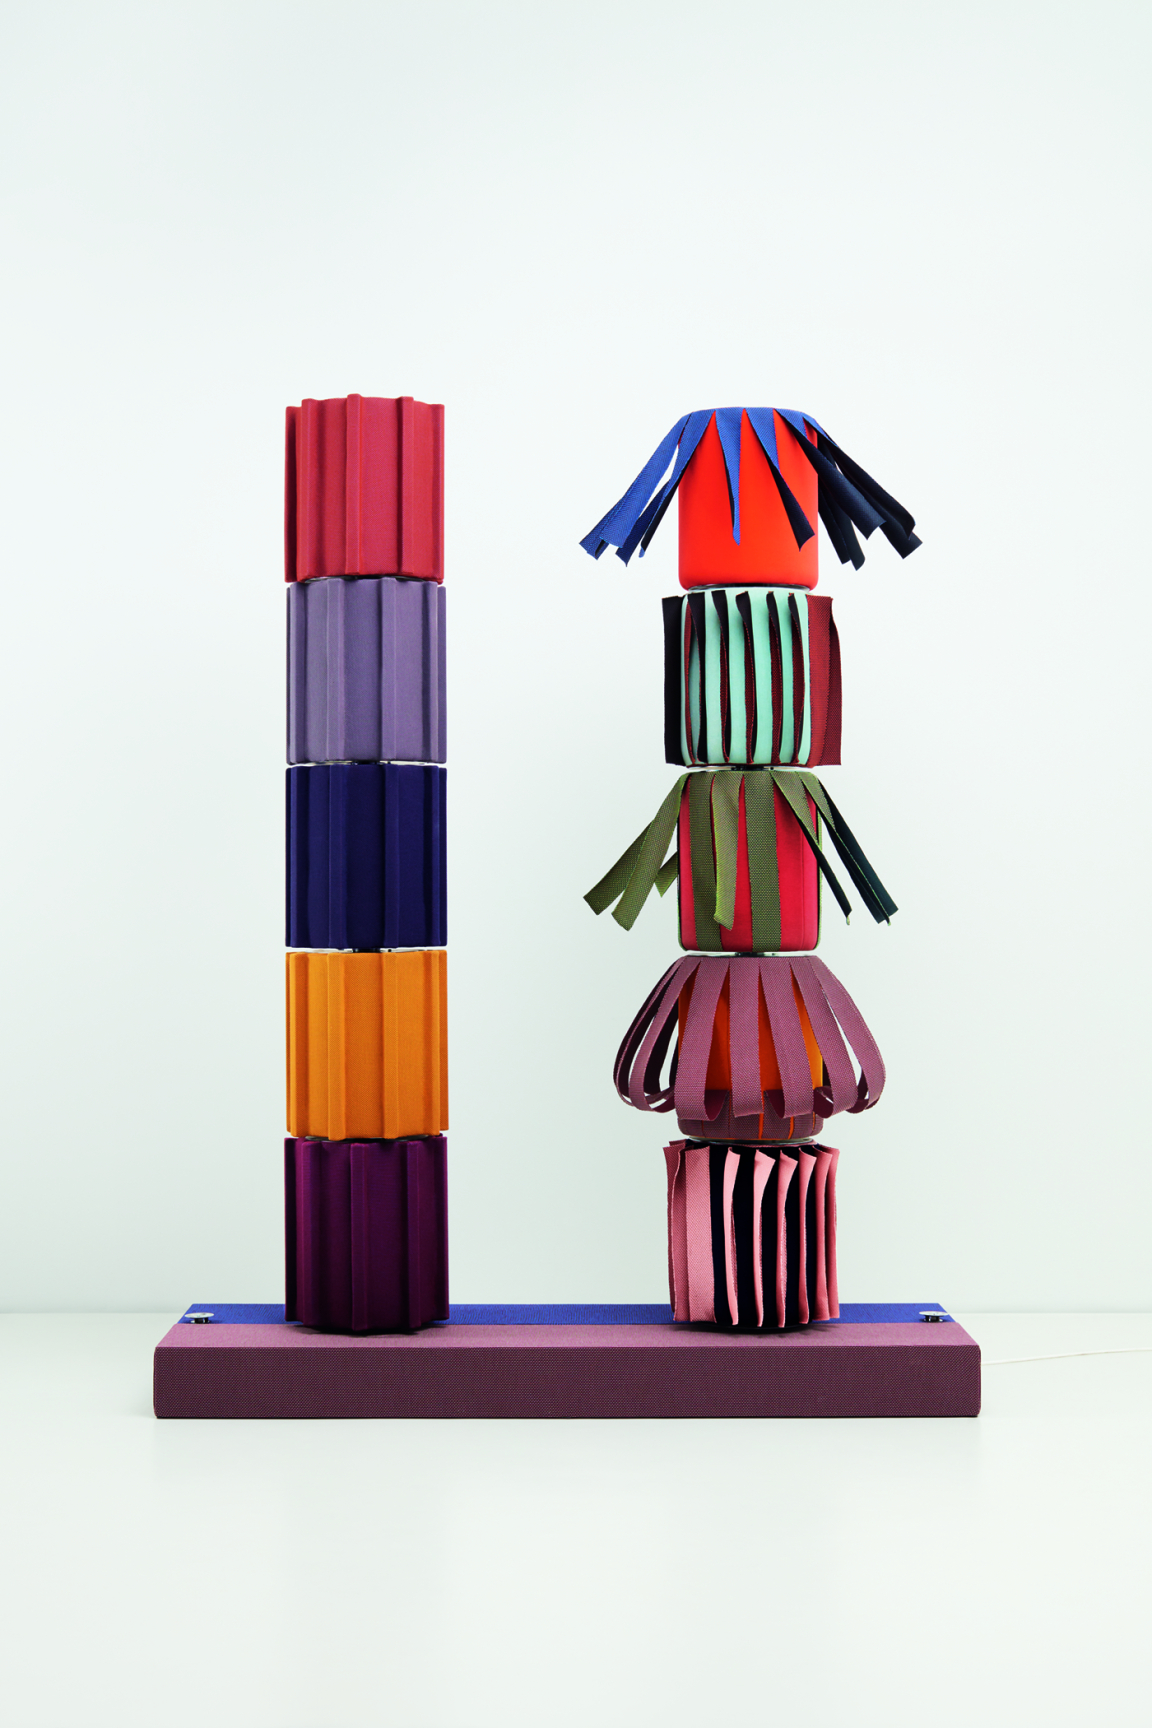 Knit Project - Objects of Common Interest Doric Columns Kinetic Object 2020 Copyright Luke Evans